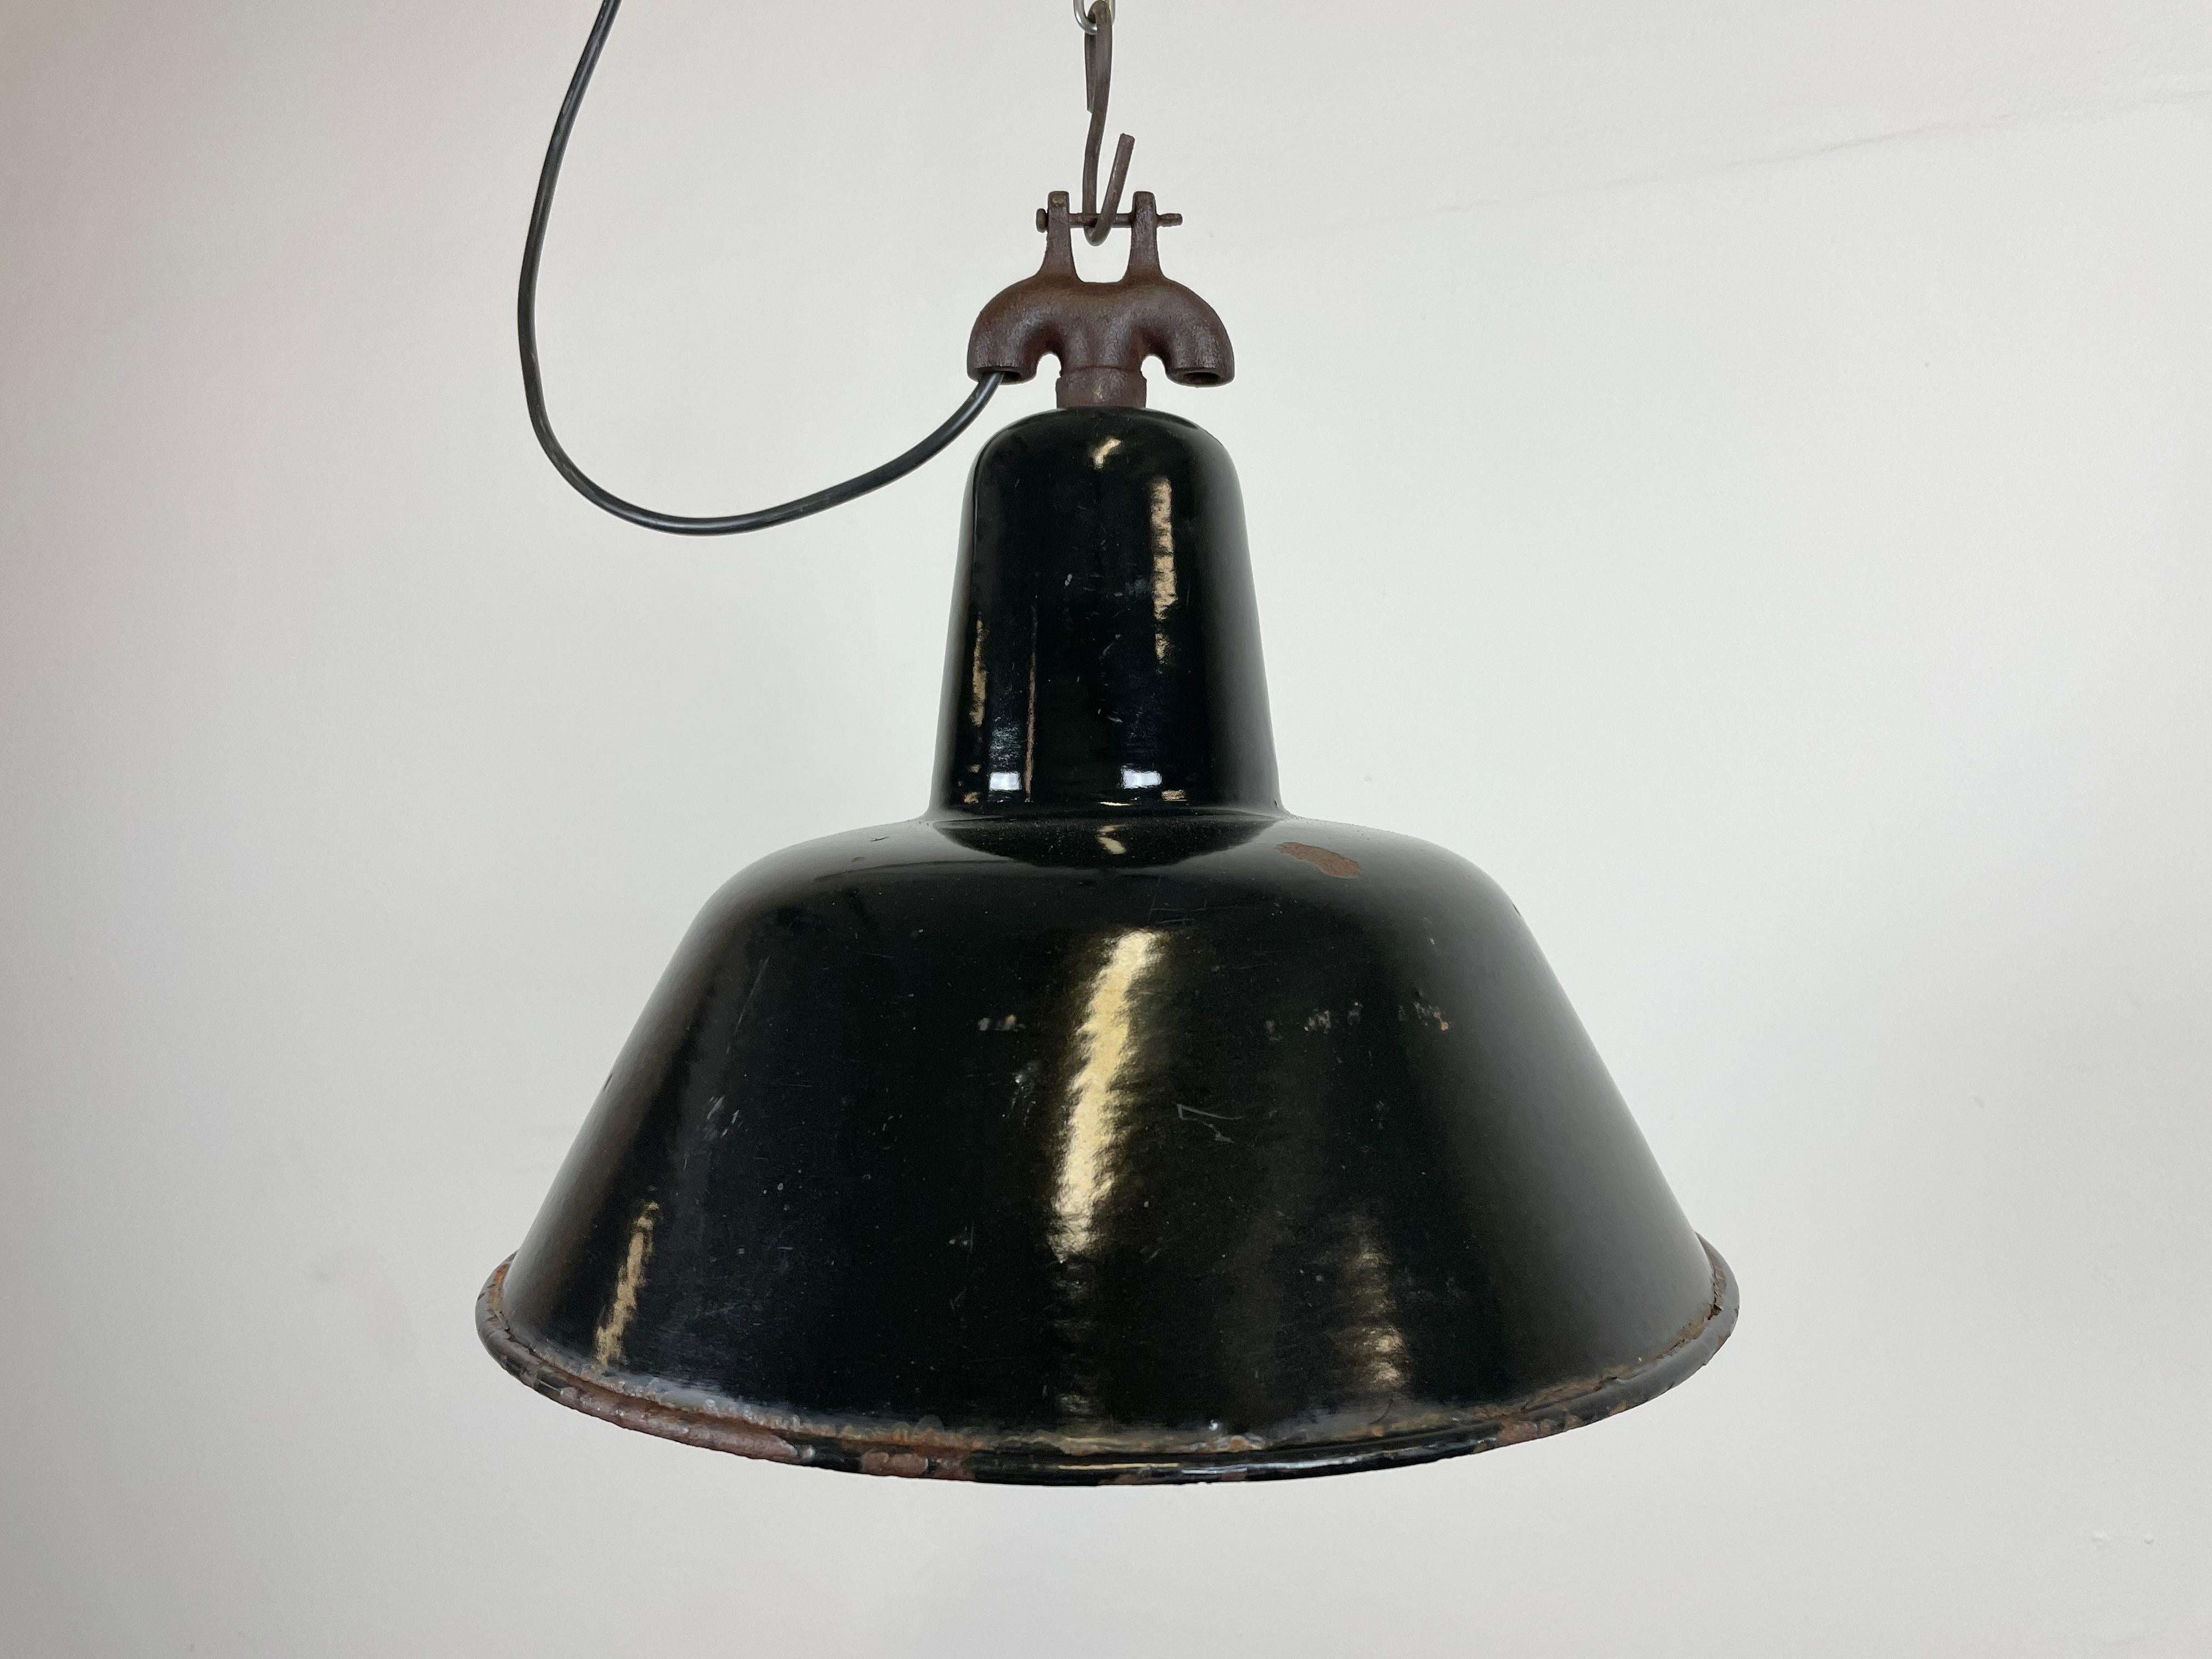 Industrial black enamel pendant light made in former Czechoslovakia during the 1950s. White enamel inside the shade. Cast iron top. The porcelain socket requires E 27 light bulbs. New wire. Fully functional. The weight of the lamp is 1 kg.